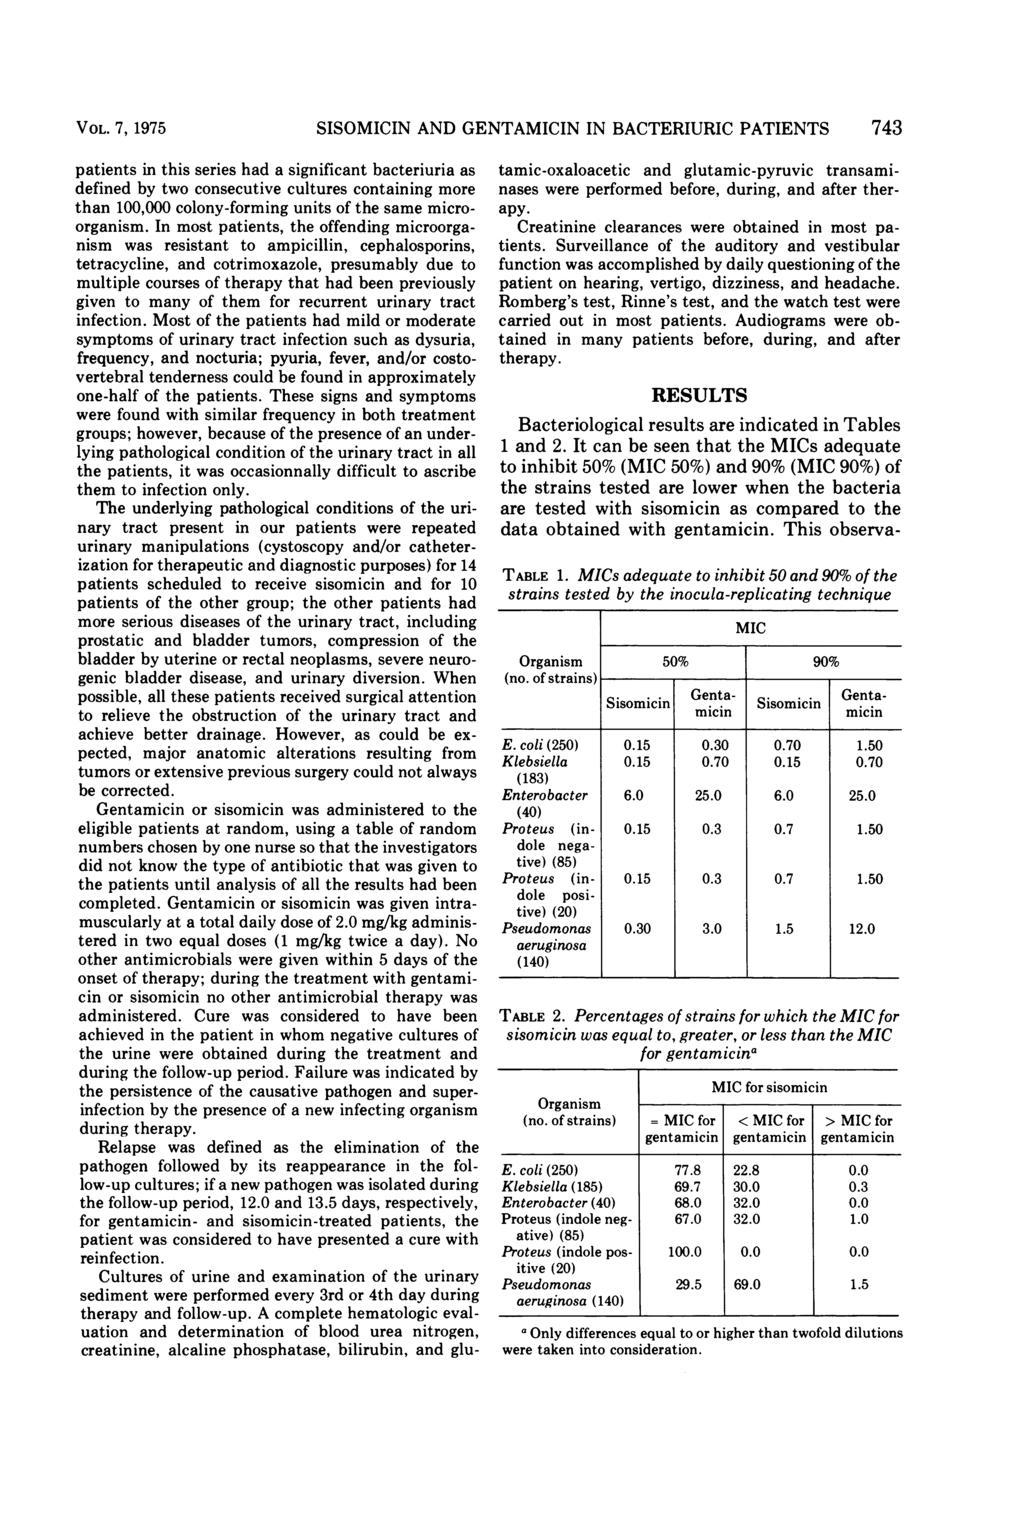 VOL. 7, 1975 SISOMICIN AND GENTAMICIN IN BACTERIURIC PATIENTS 743 patients in this series had a significant bacteriuria as defined by two consecutive cultures containing more than 100,000